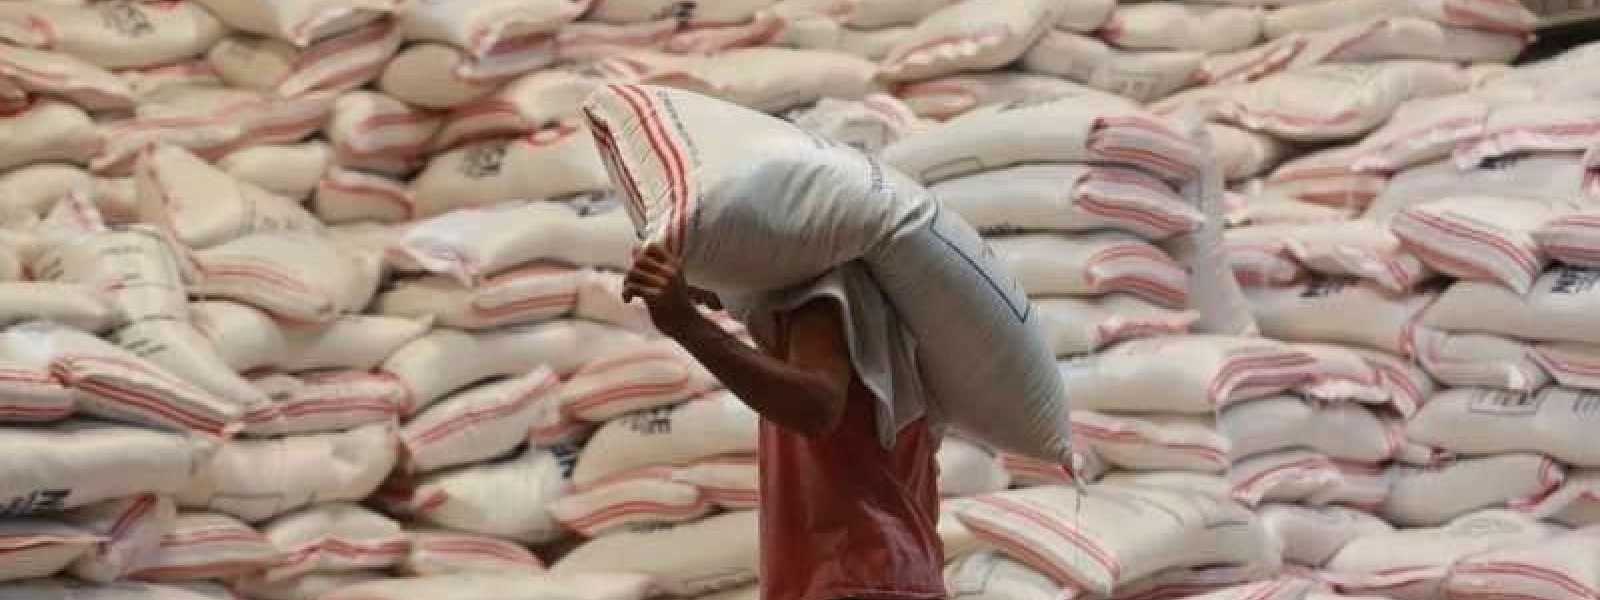 PMB Rice to the market from next week